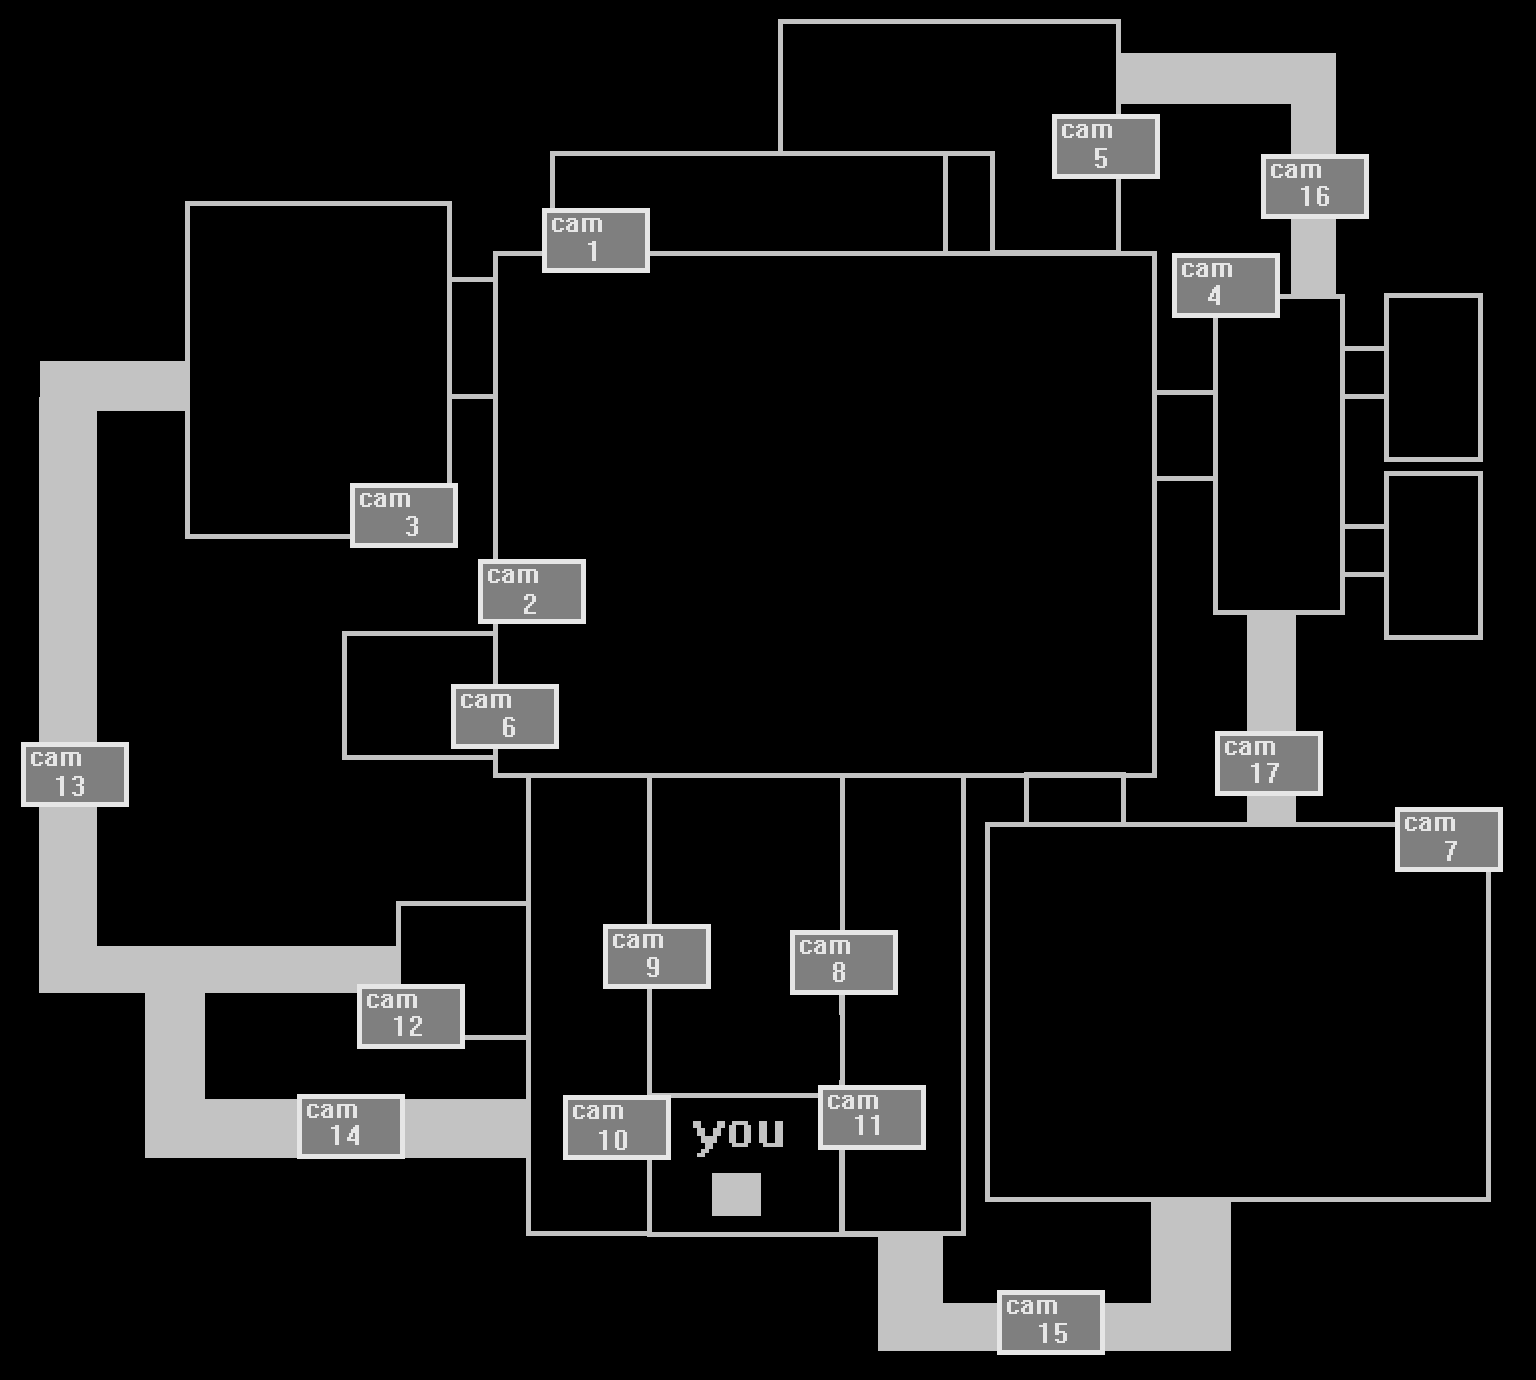 Five Nights At Freddy's 1 Cameras Maps by slendytubbies2d on DeviantArt